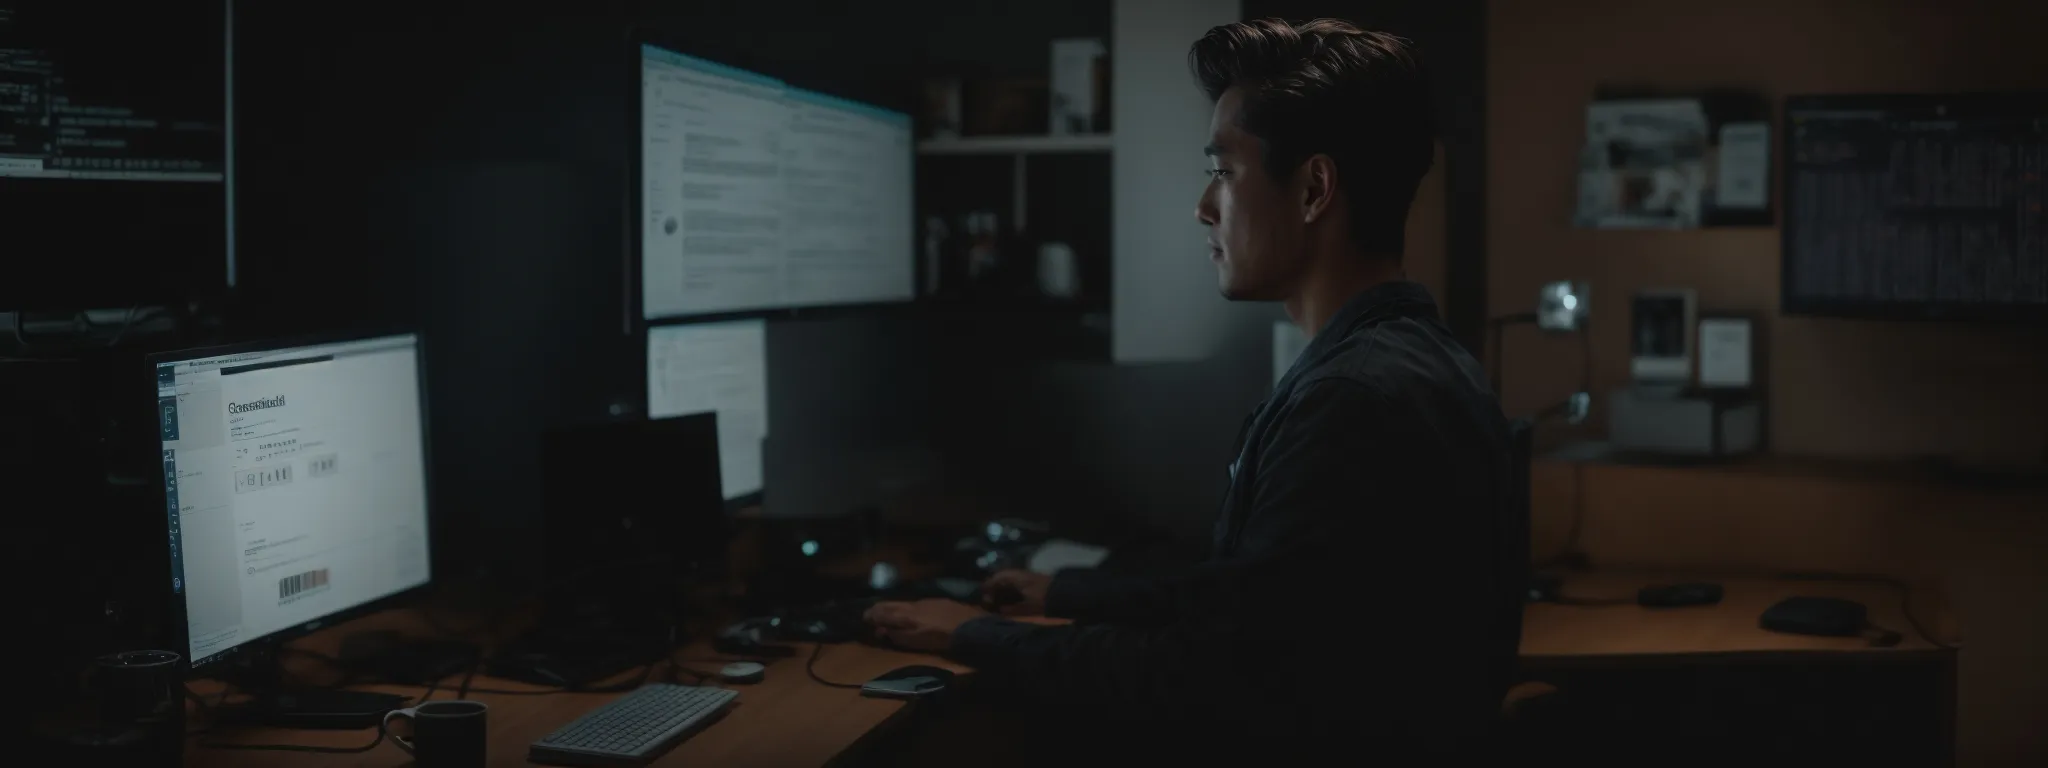 a content creator sits before a computer with seo analytics on the screen, immersed in digital marketing strategy.